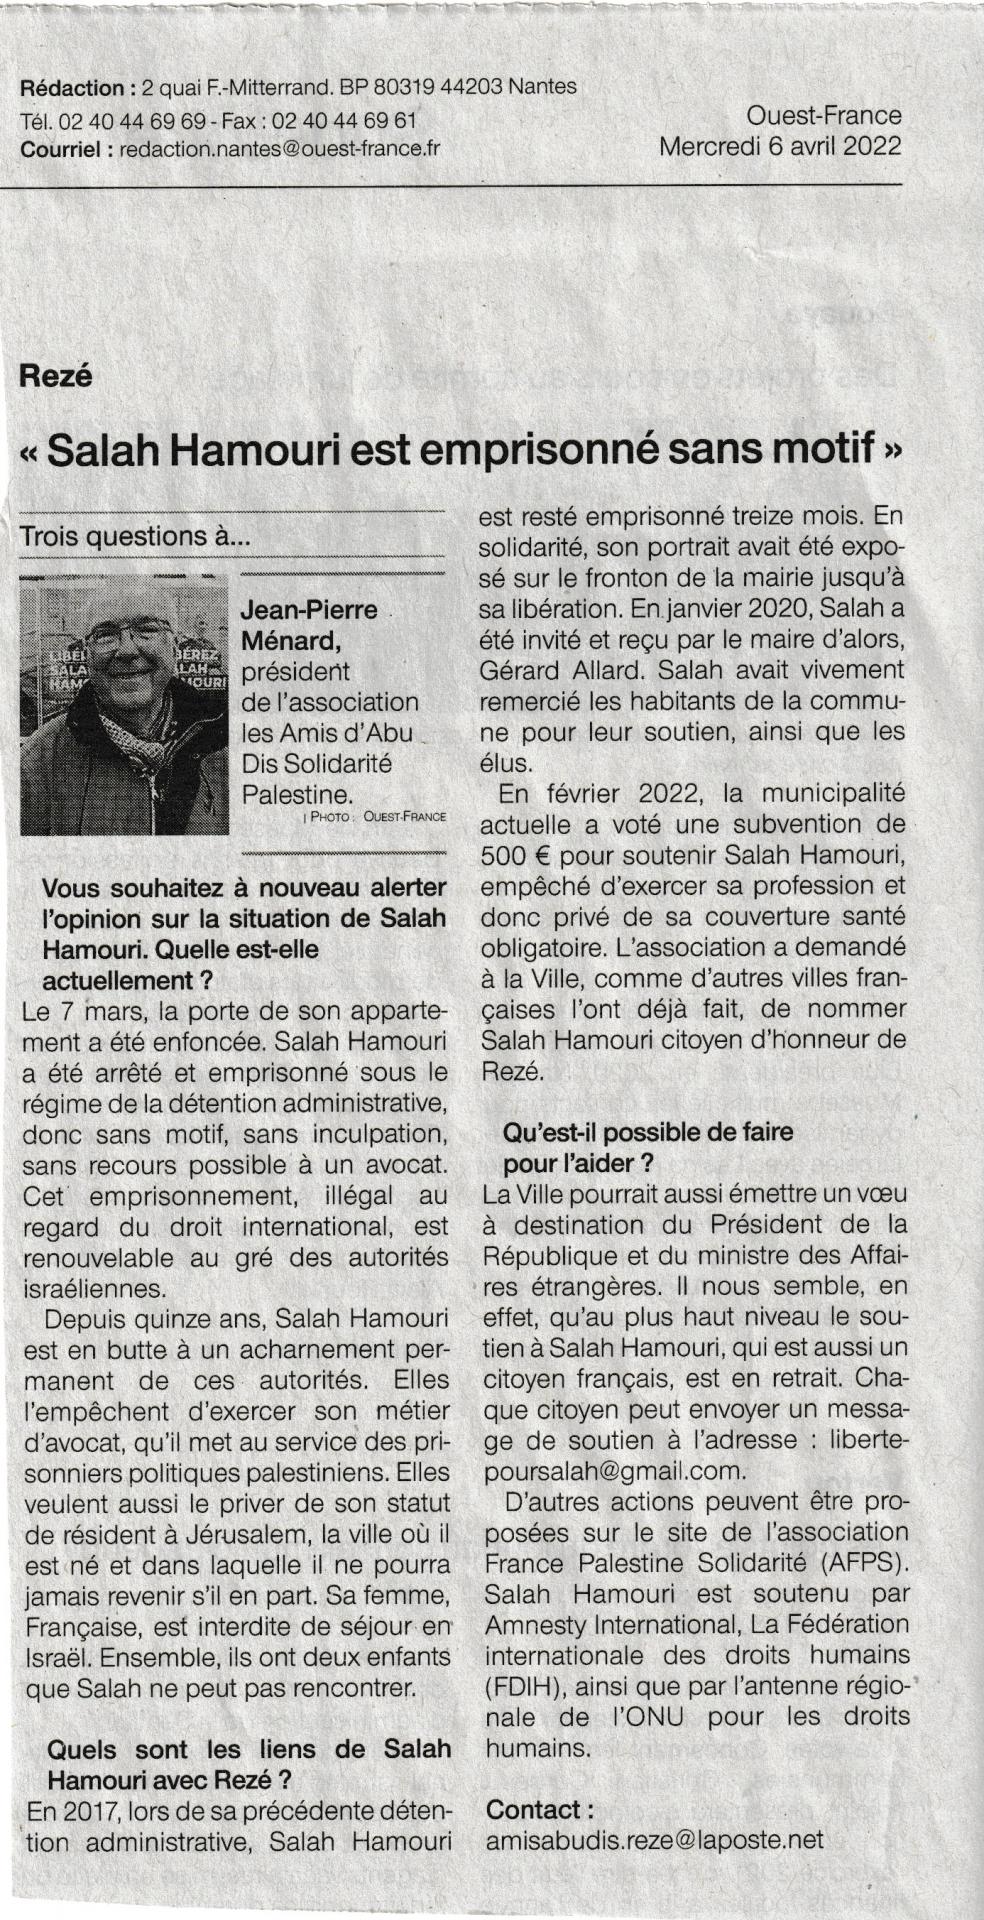 Salahouestfrance6avril2022